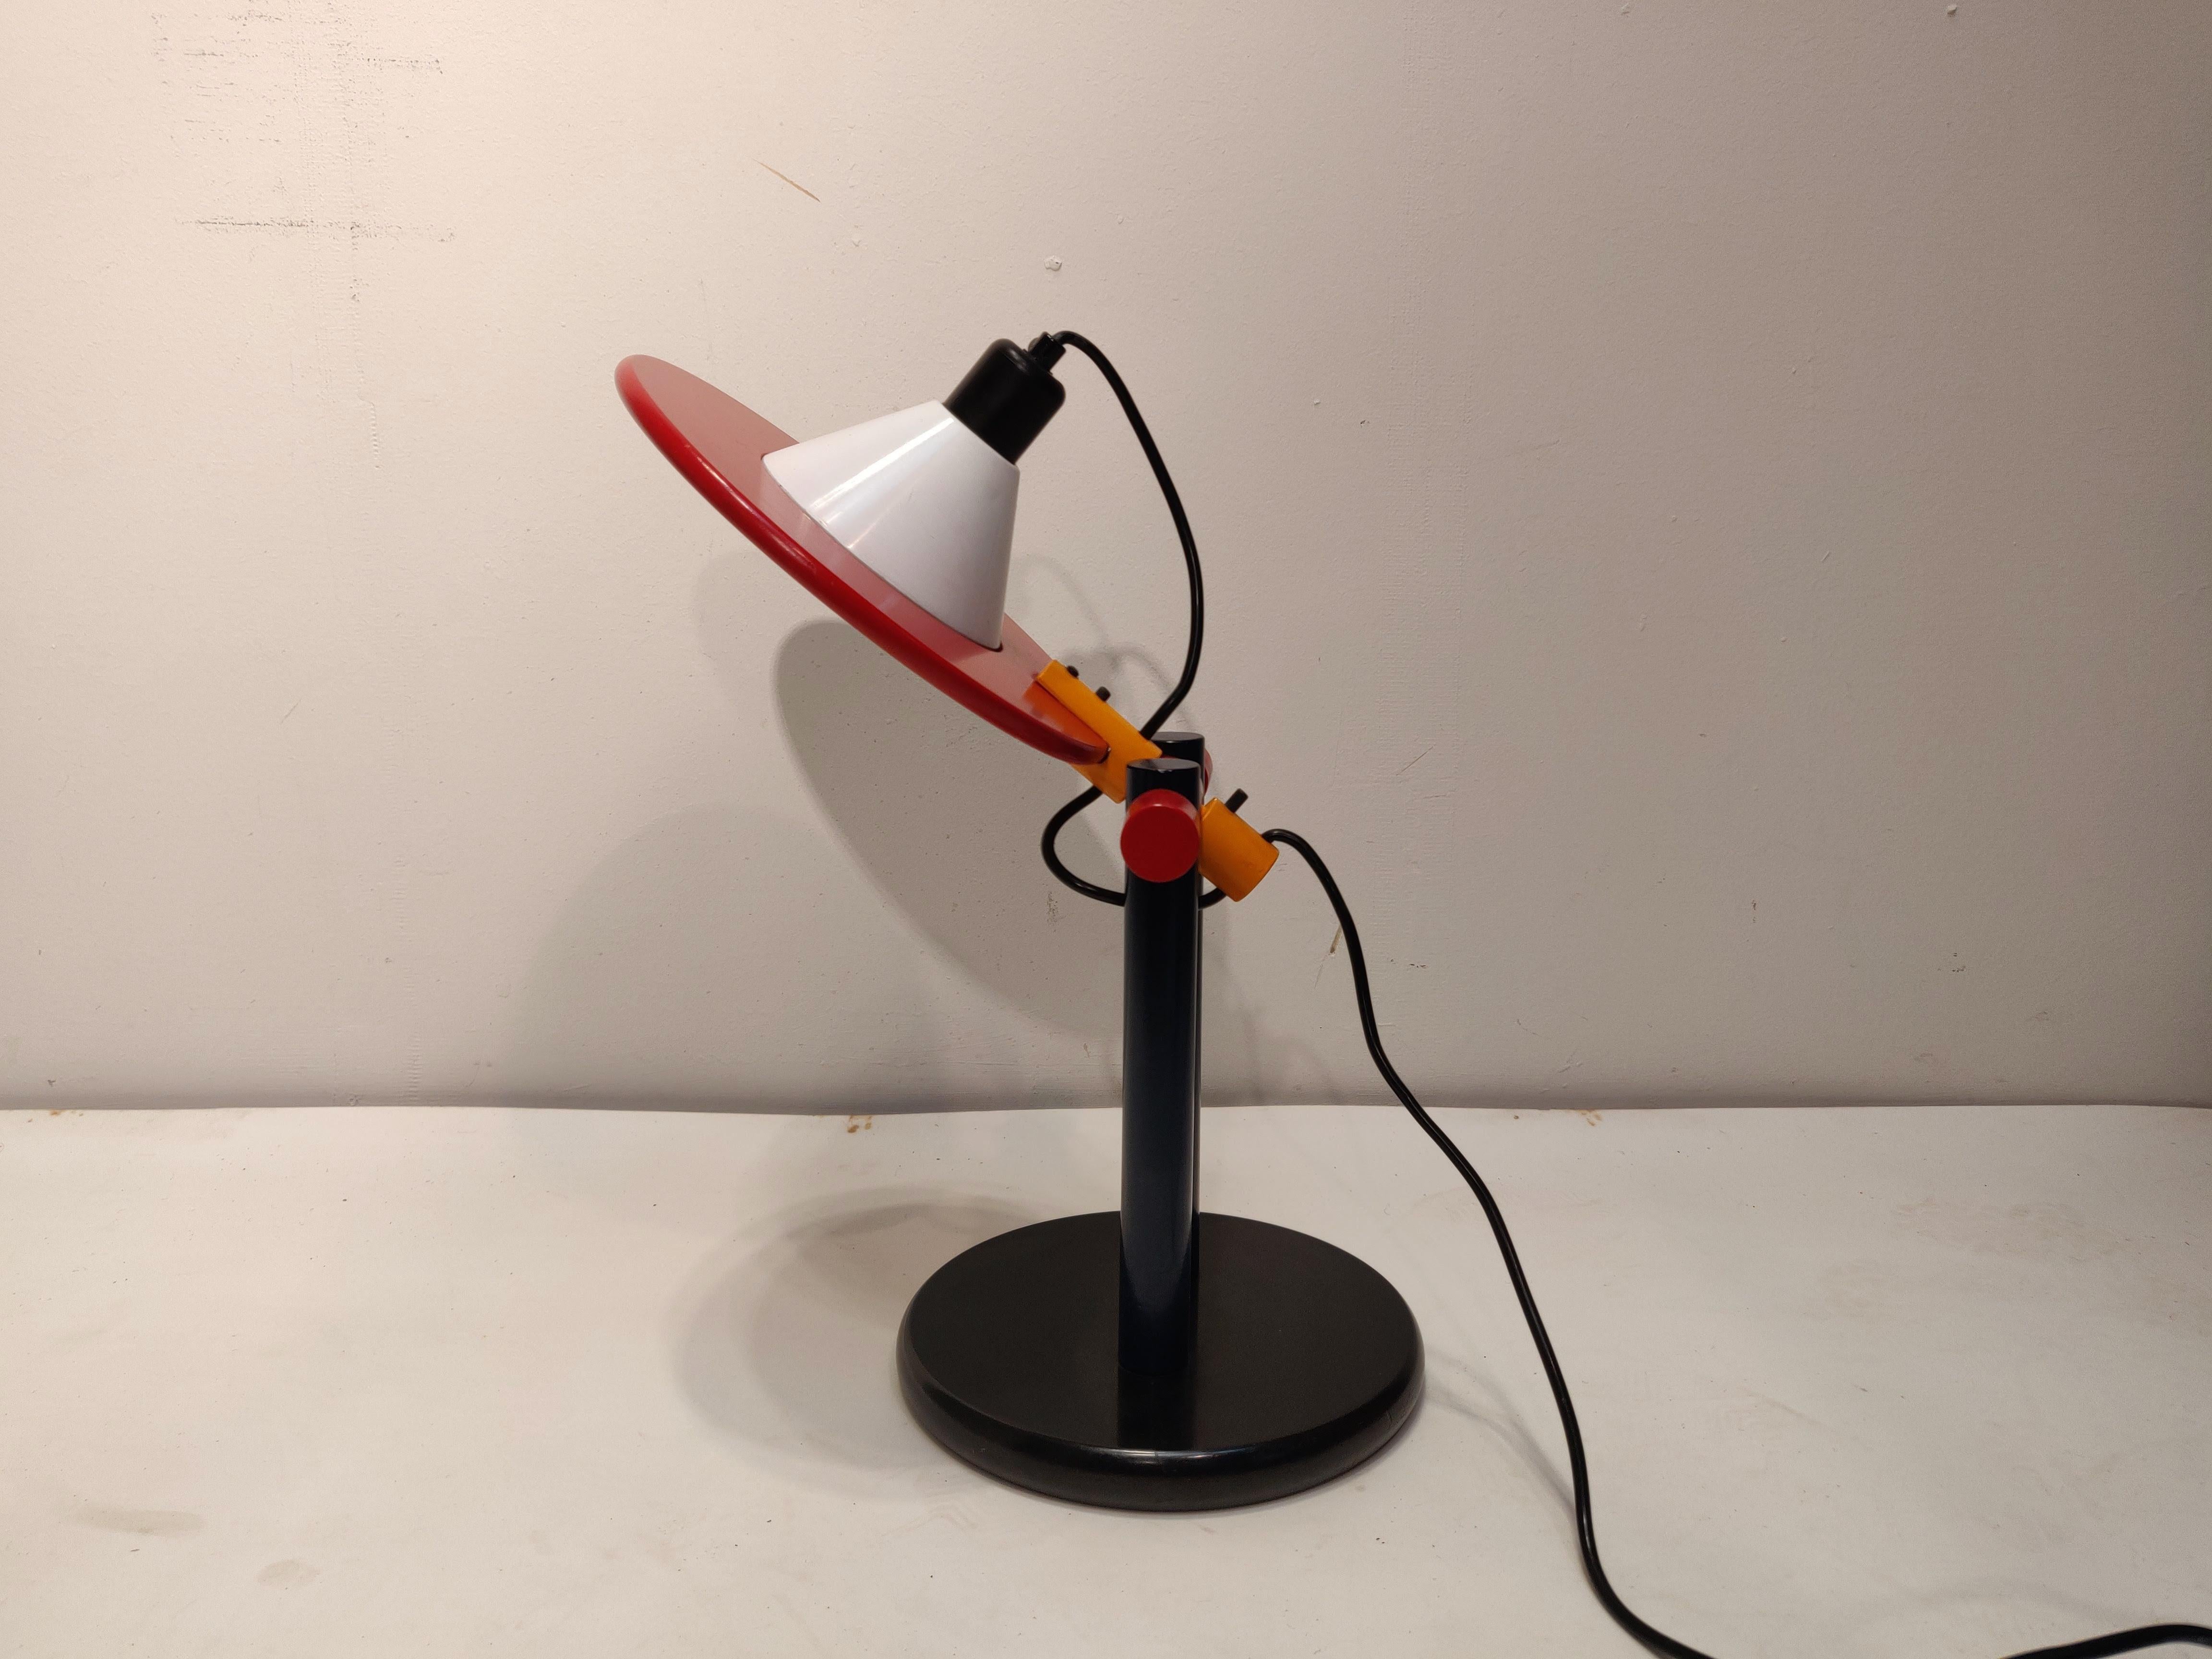 “Colorín is a lamp that was dreamed rather than designed. At that time, I designed wooden toys (construction toys, vehicles) for small children, using turned woods lacquered in basic colours and assembled with simple systems such as rods, dowels…,”